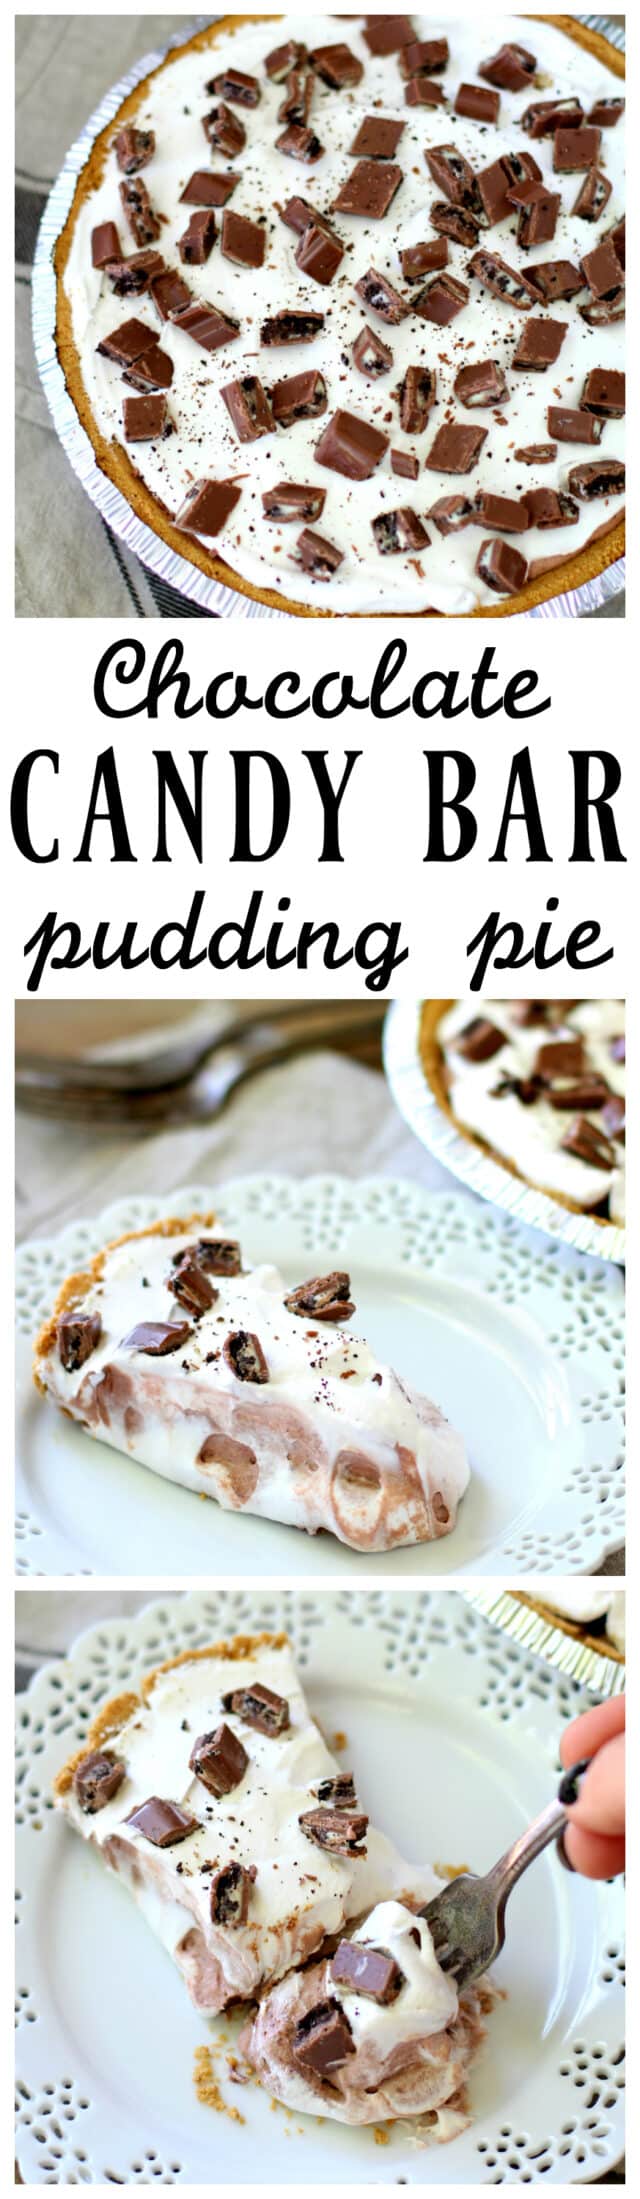 Chocolate Candy Bar Pudding Pie - a creamy dreamy treat infused with chocolate, nestled in my favorite graham cracker crust and topped off with decadent candy bar pieces. I can't think of a better way to kick off the summer season!